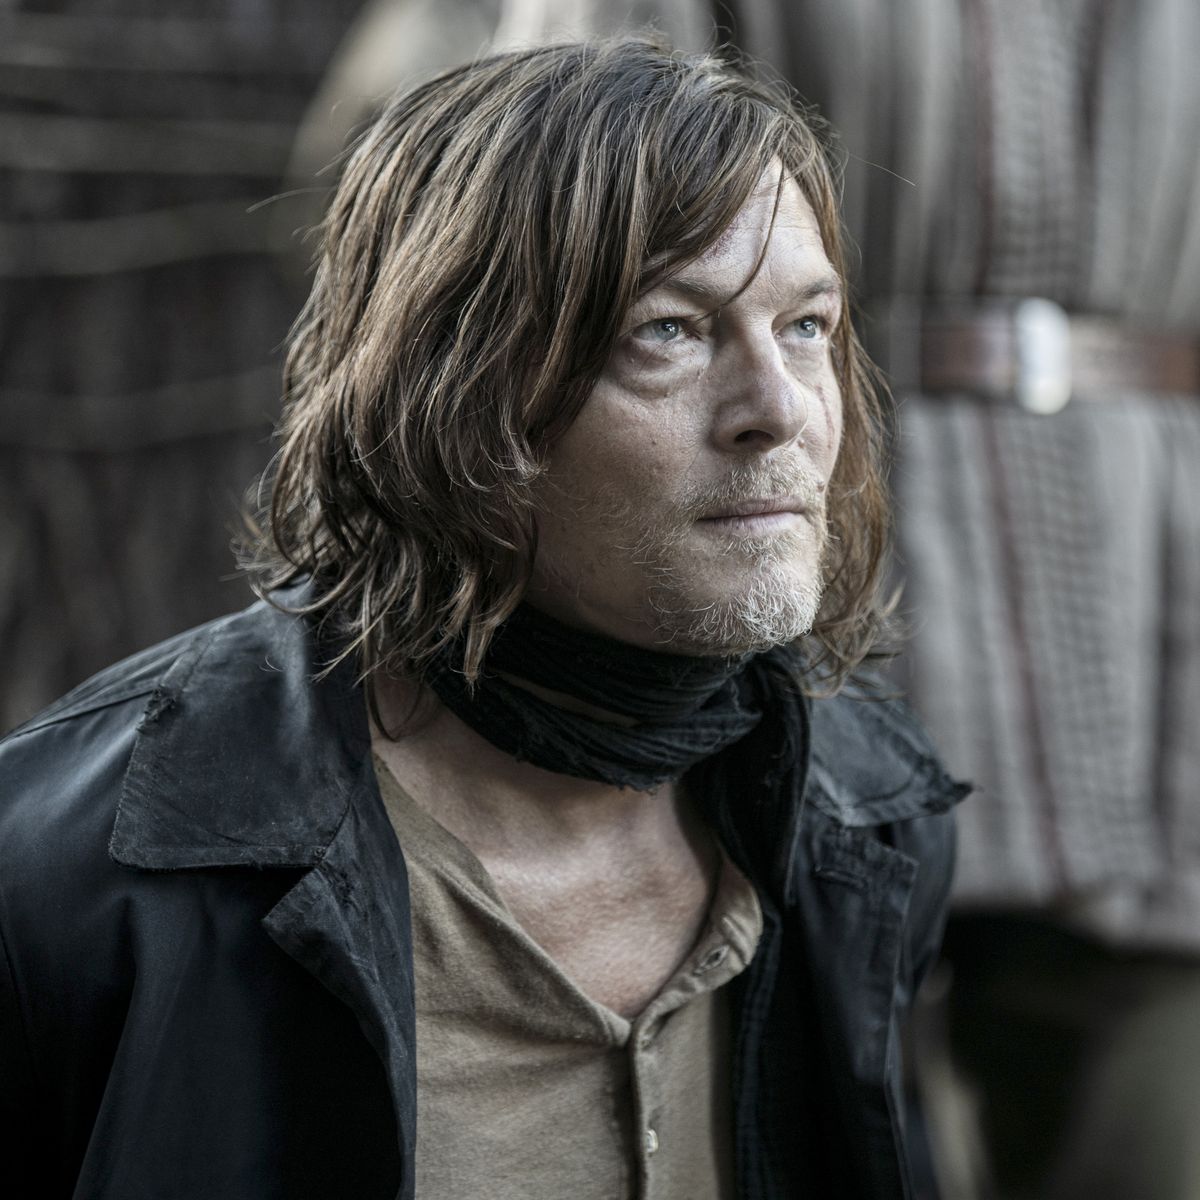 "The Walking Dead: Daryl Dixon" Becomes #1 Most-Viewed Premiere and Season in AMC+ History